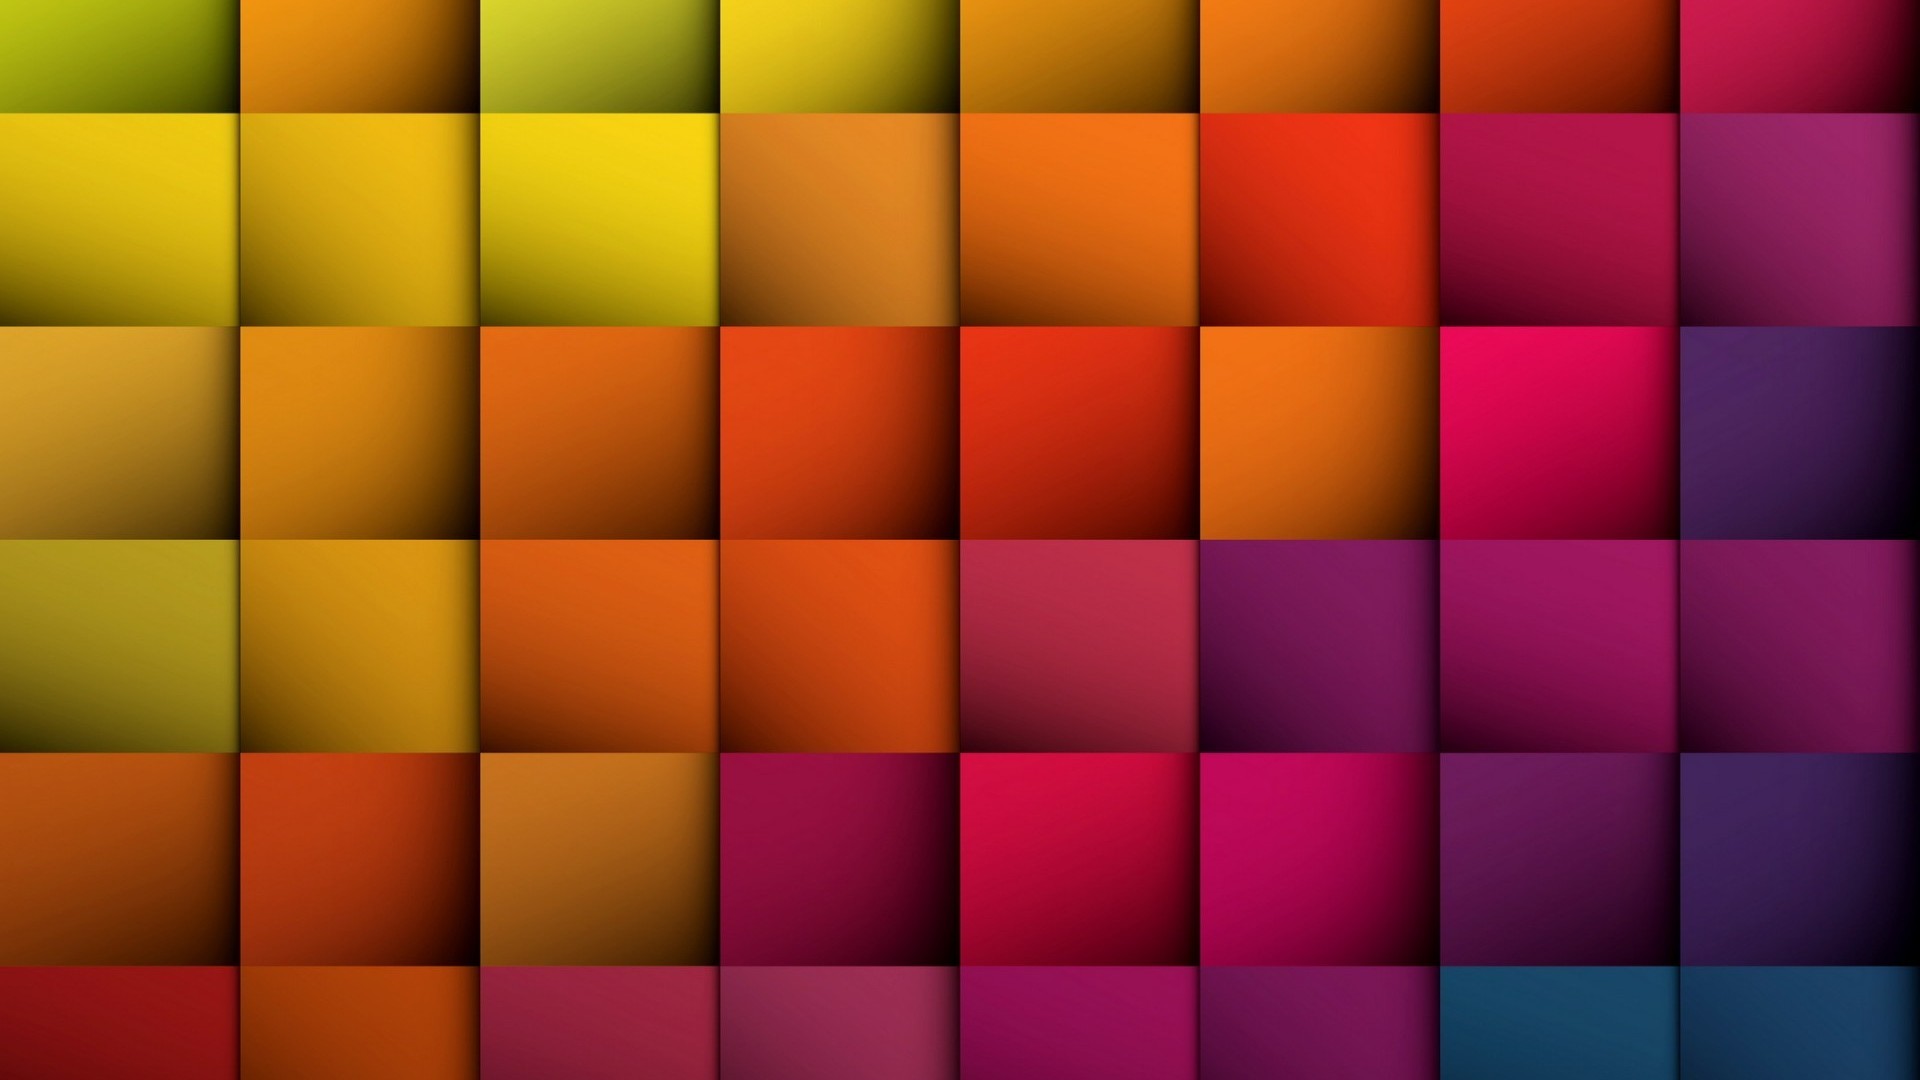 1920x1080 ... 09.08.15 - px Cool Bright Color Desktop Wallpapers - Free .